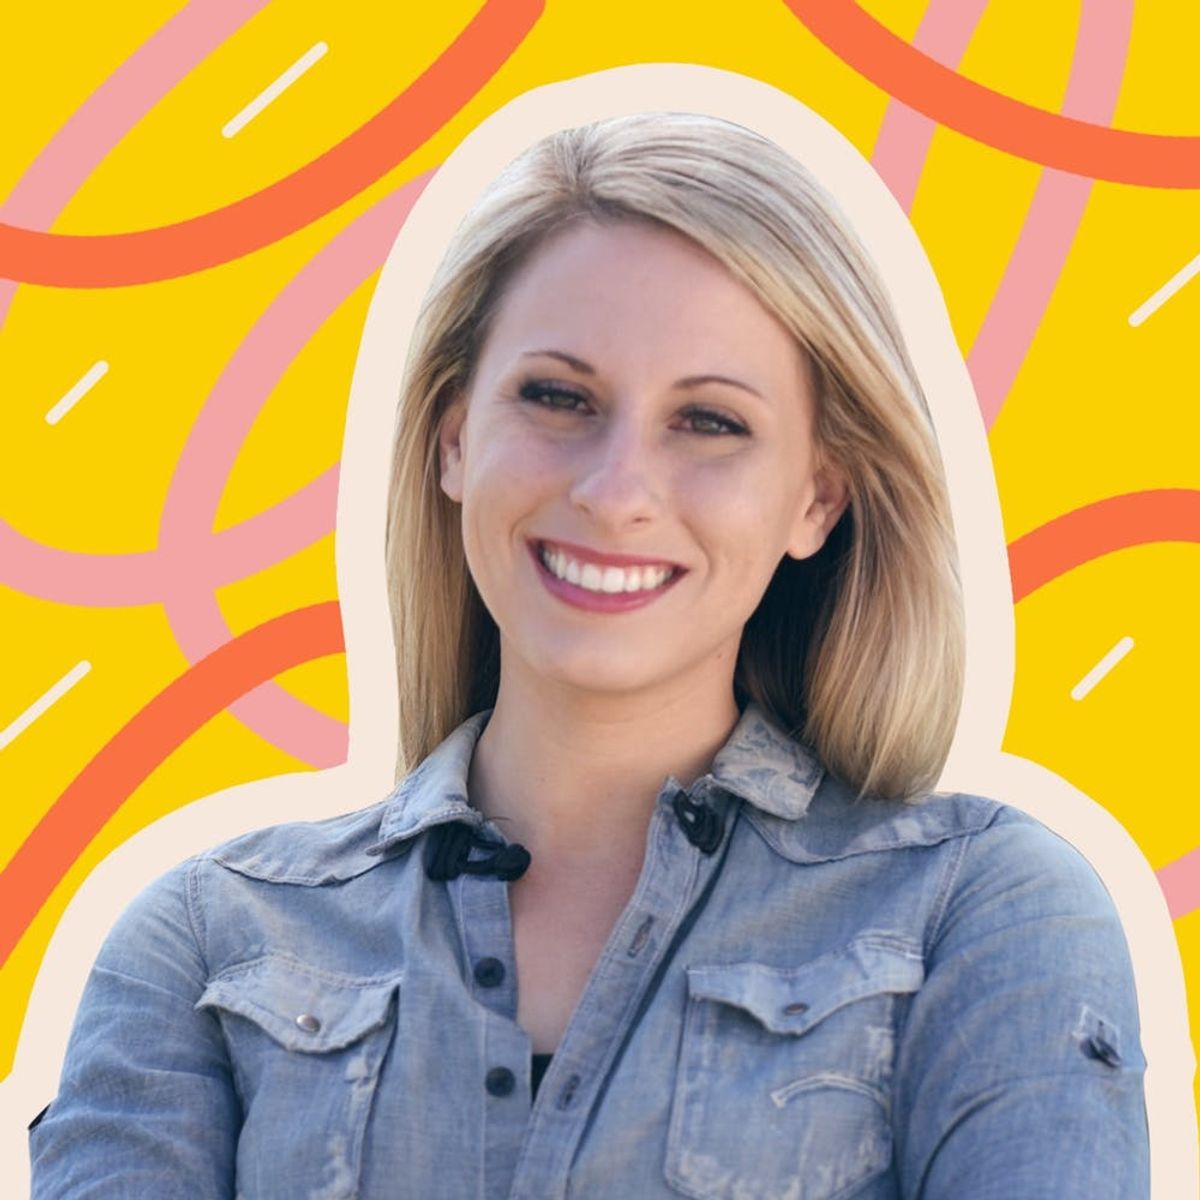 Congressional Hopeful Katie Hill Says She’s Running the ‘Most Millennial Campaign Ever’